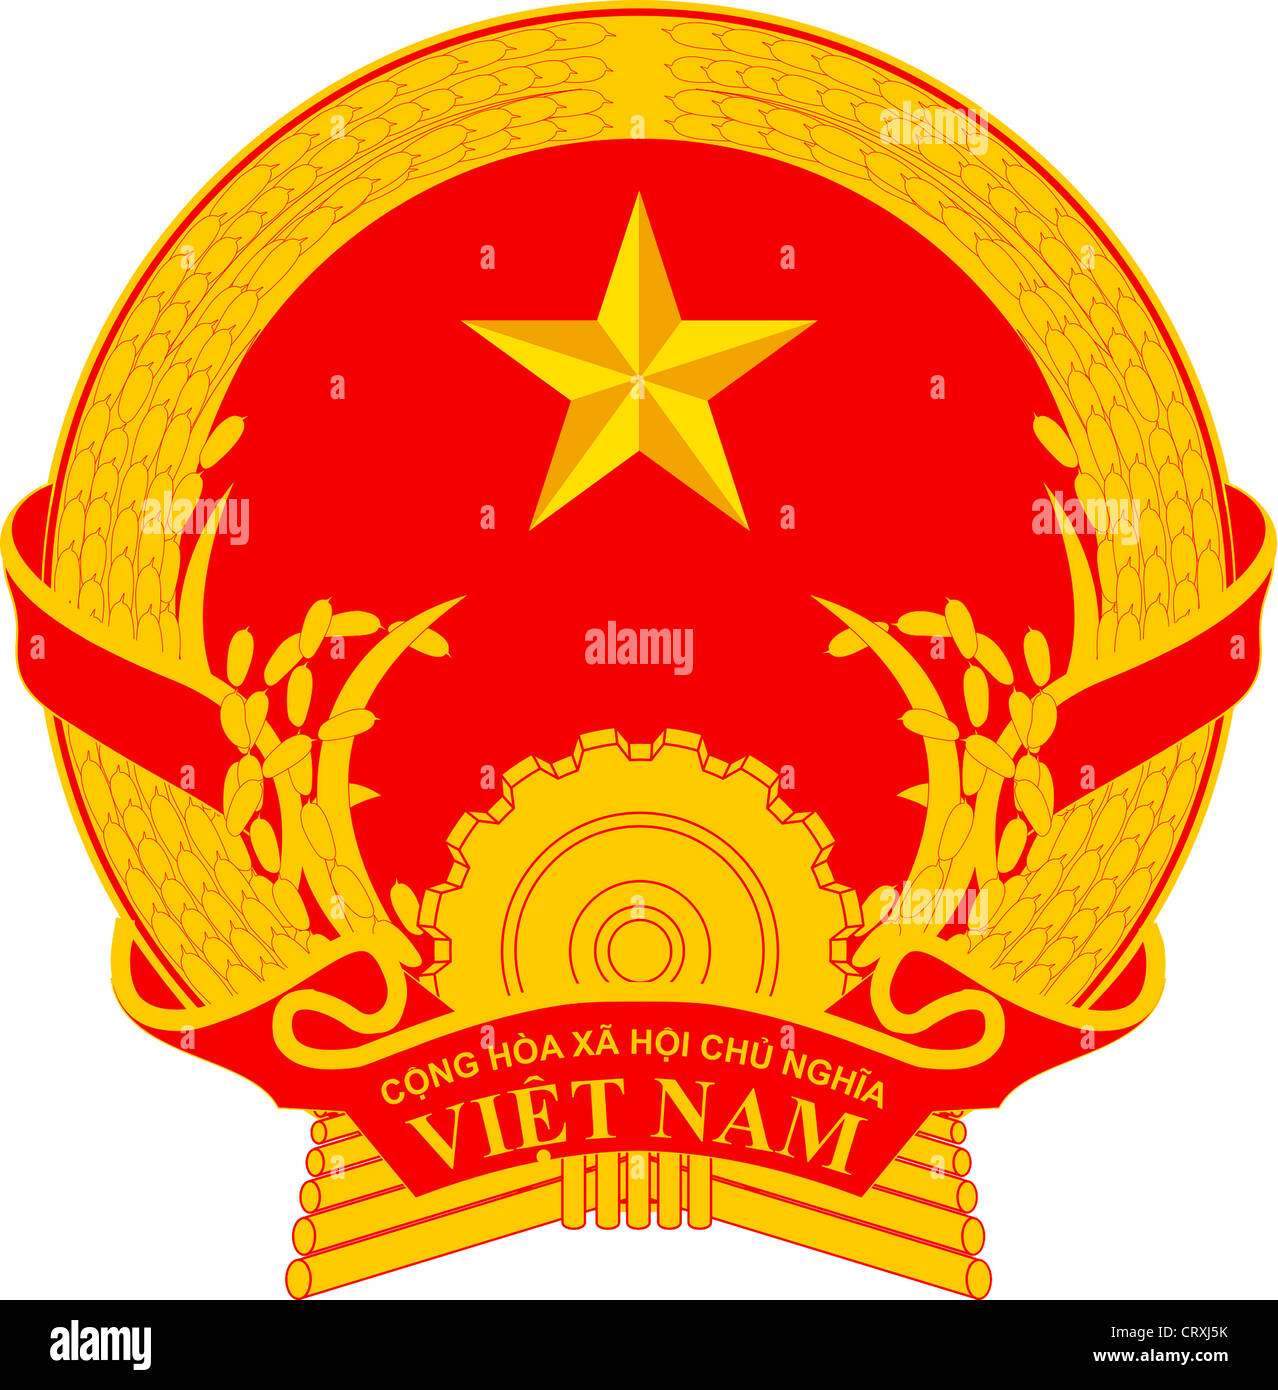 National coat of arms of the Socialist Republic of Vietnam. Stock Photo